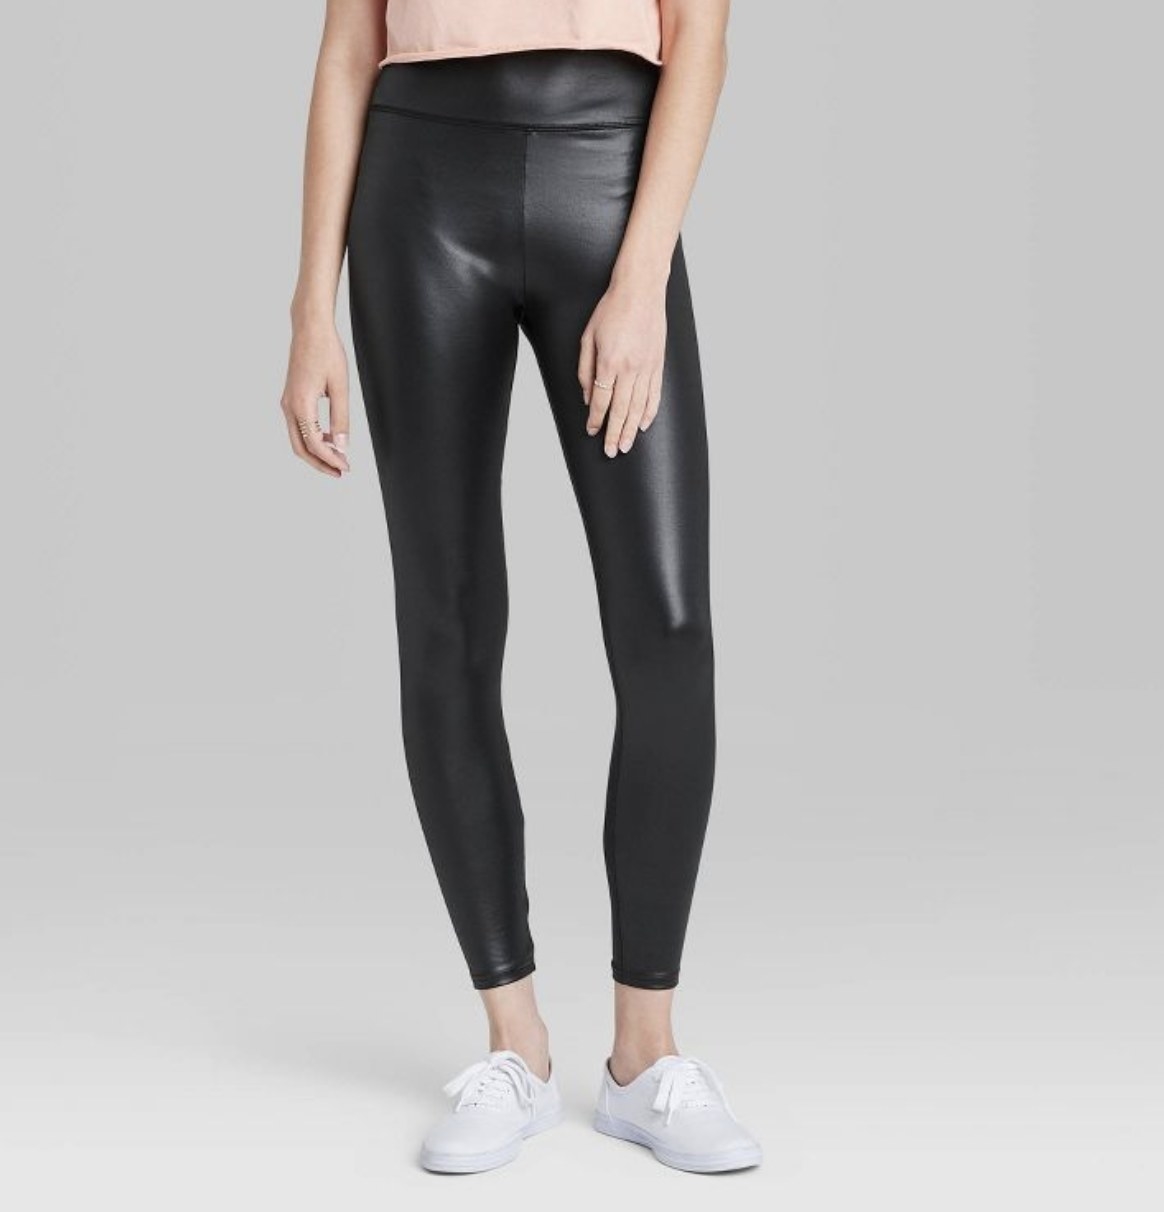 A pair of faux leather leggings